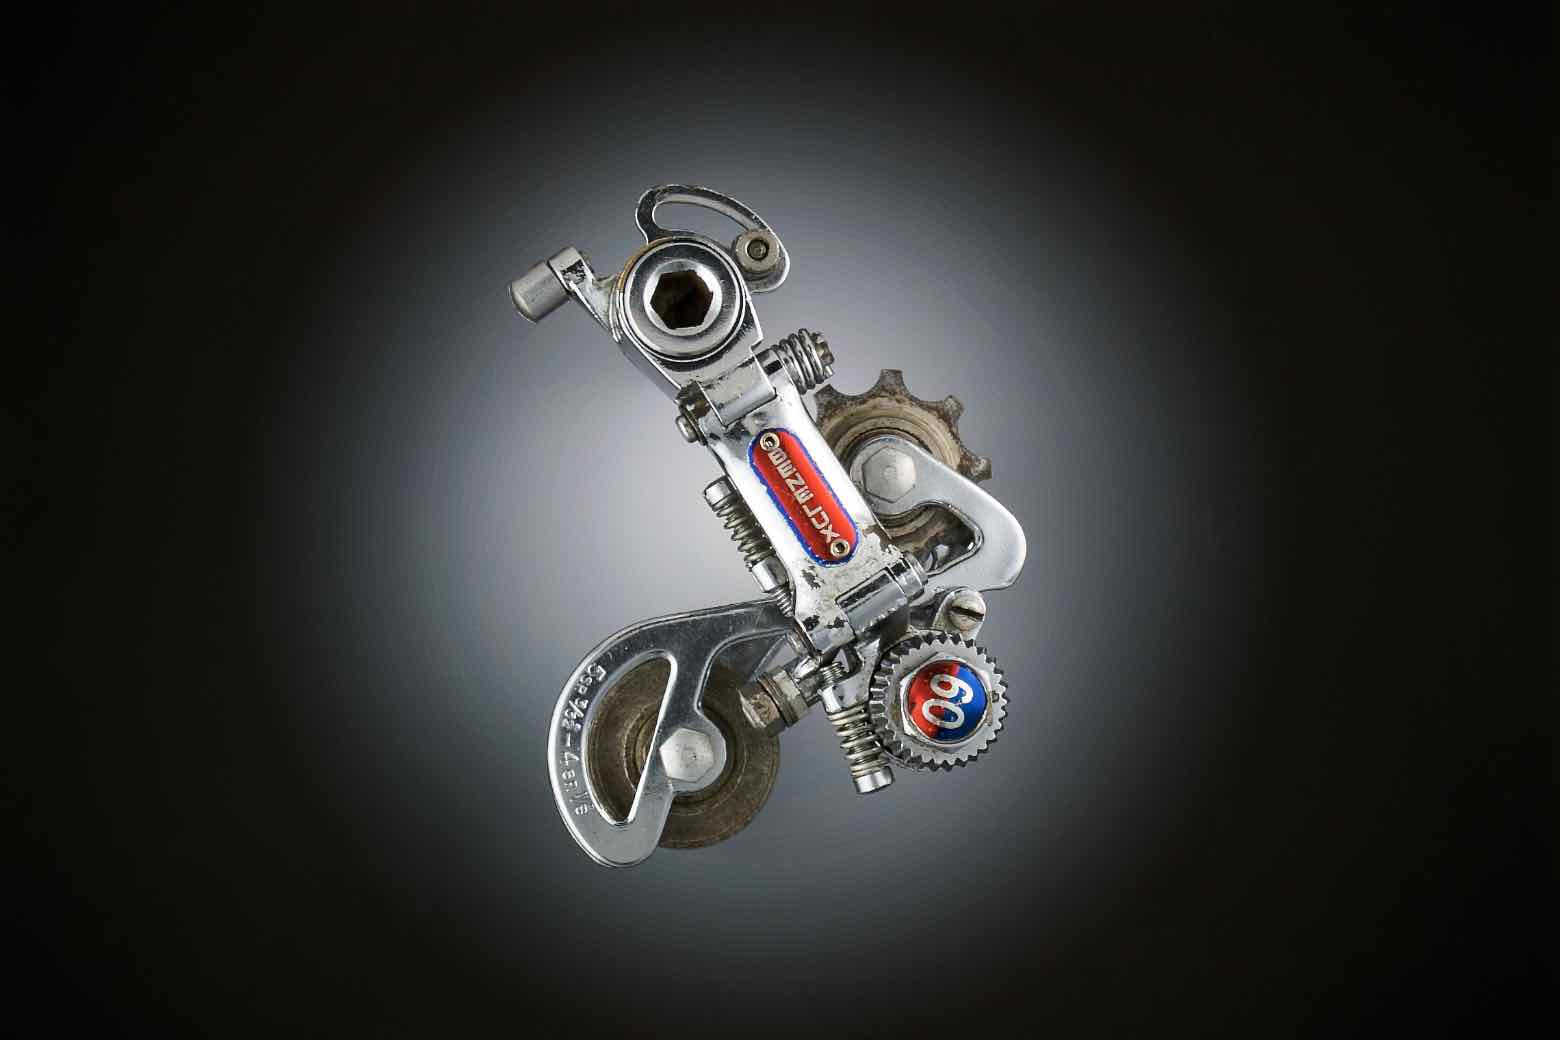 Cyclo Benelux Super 60 derailleur (2nd style) main image